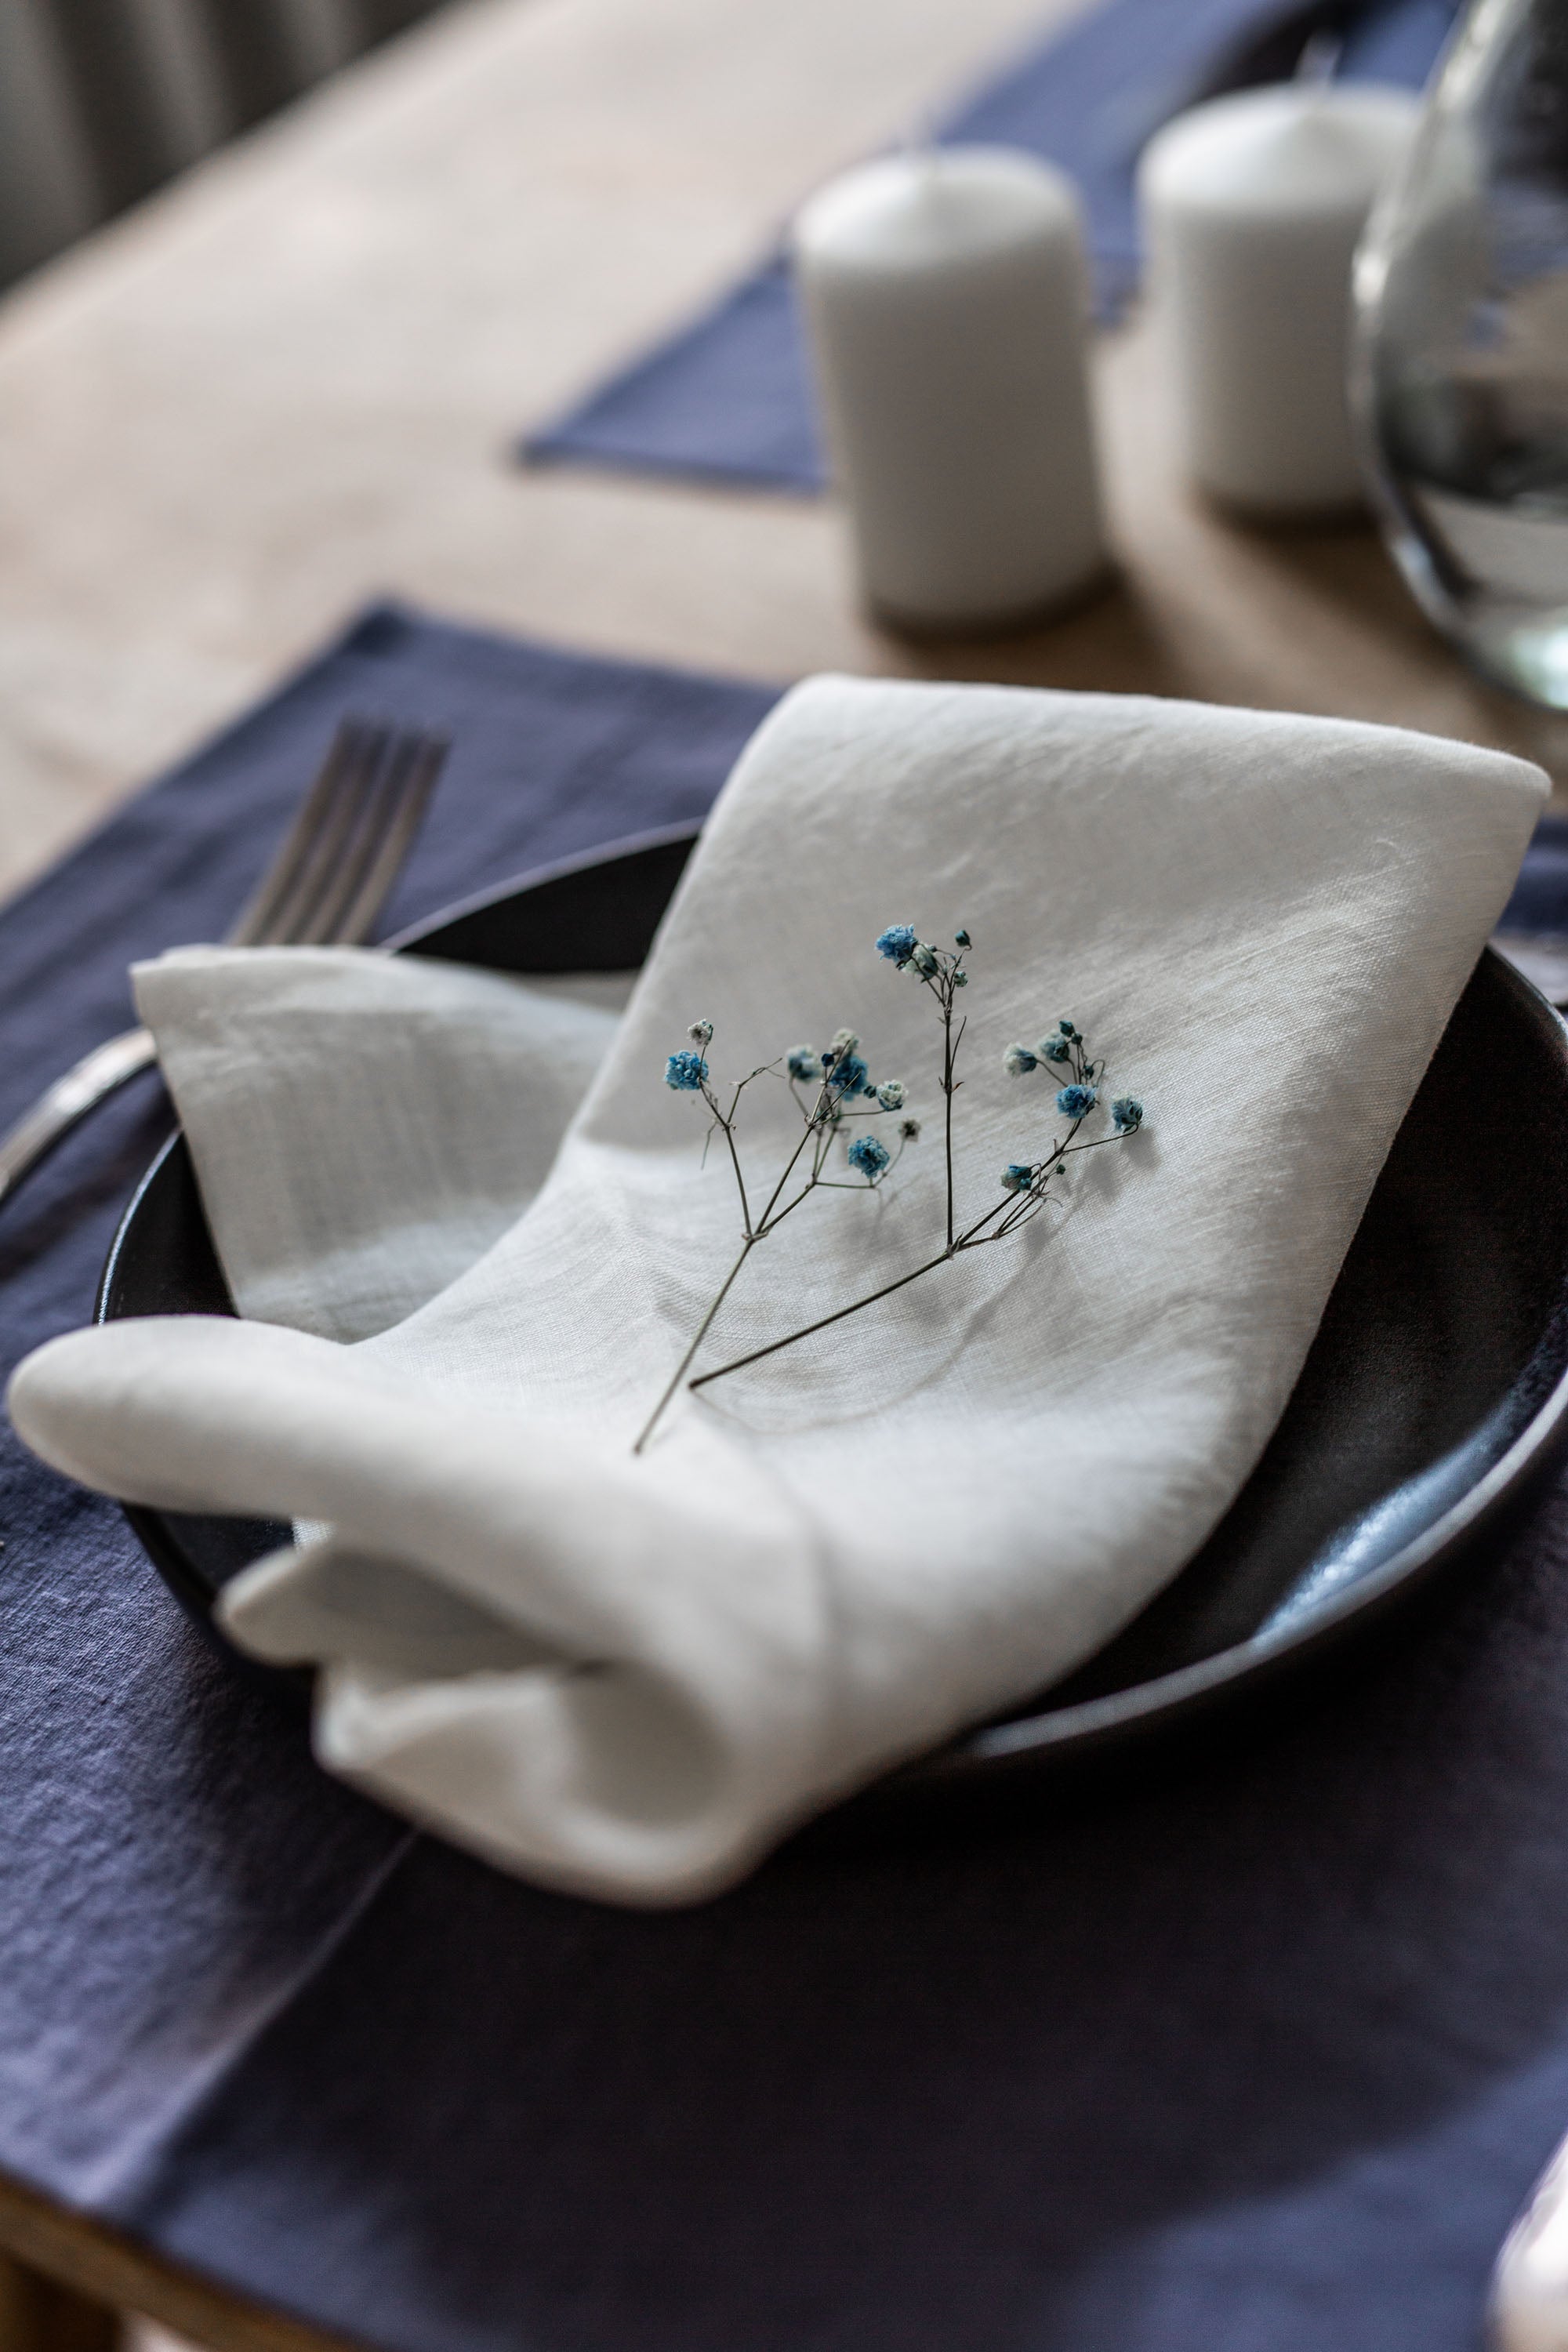 Set Dinner Table With A Focus on White Linen Napkins By AmourlInen 